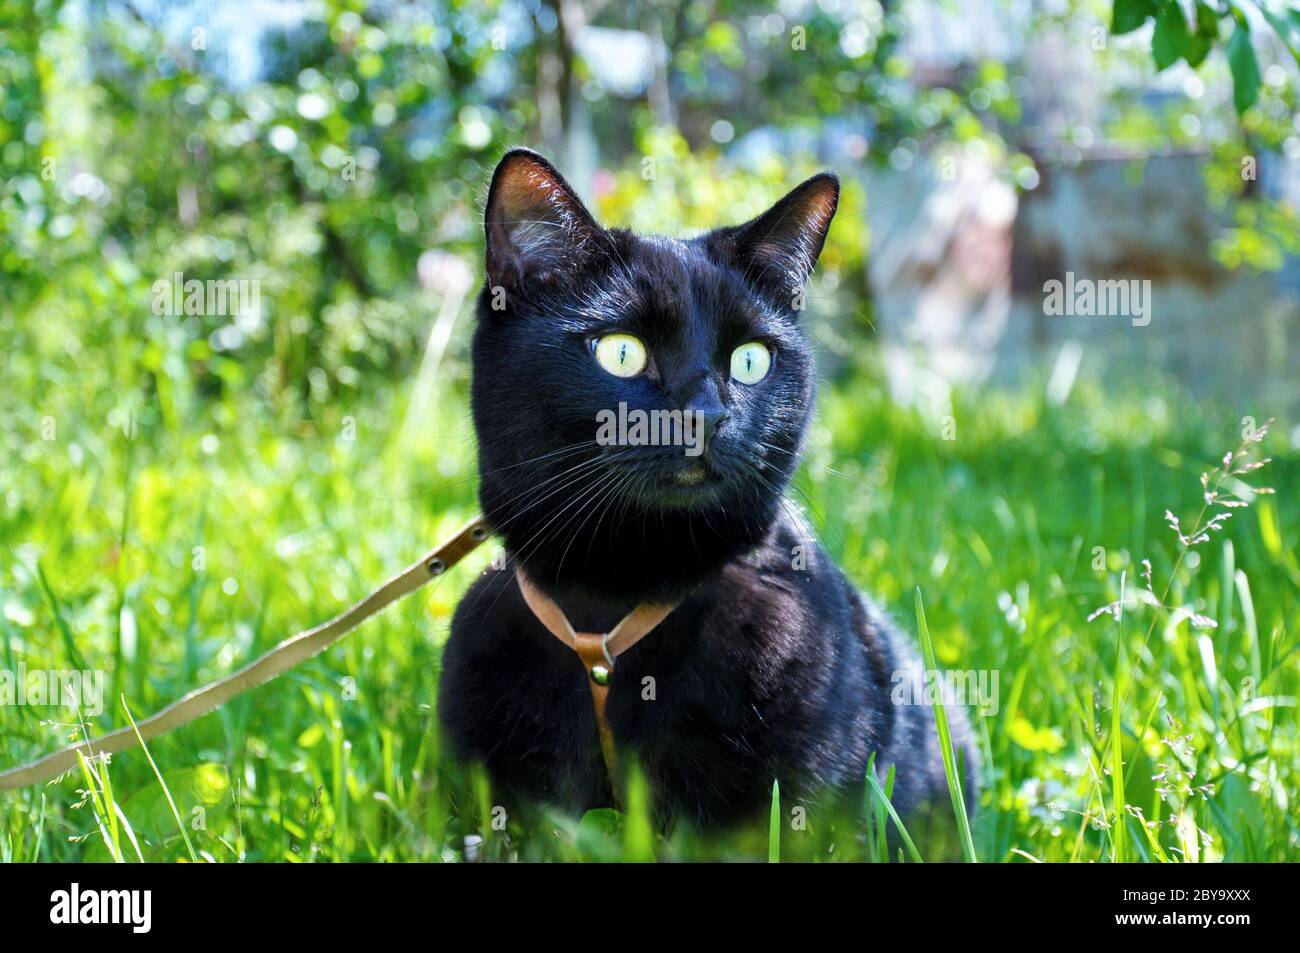 cat on leash walks in green grass, close-up portrait on blurred nature background Stock Photo